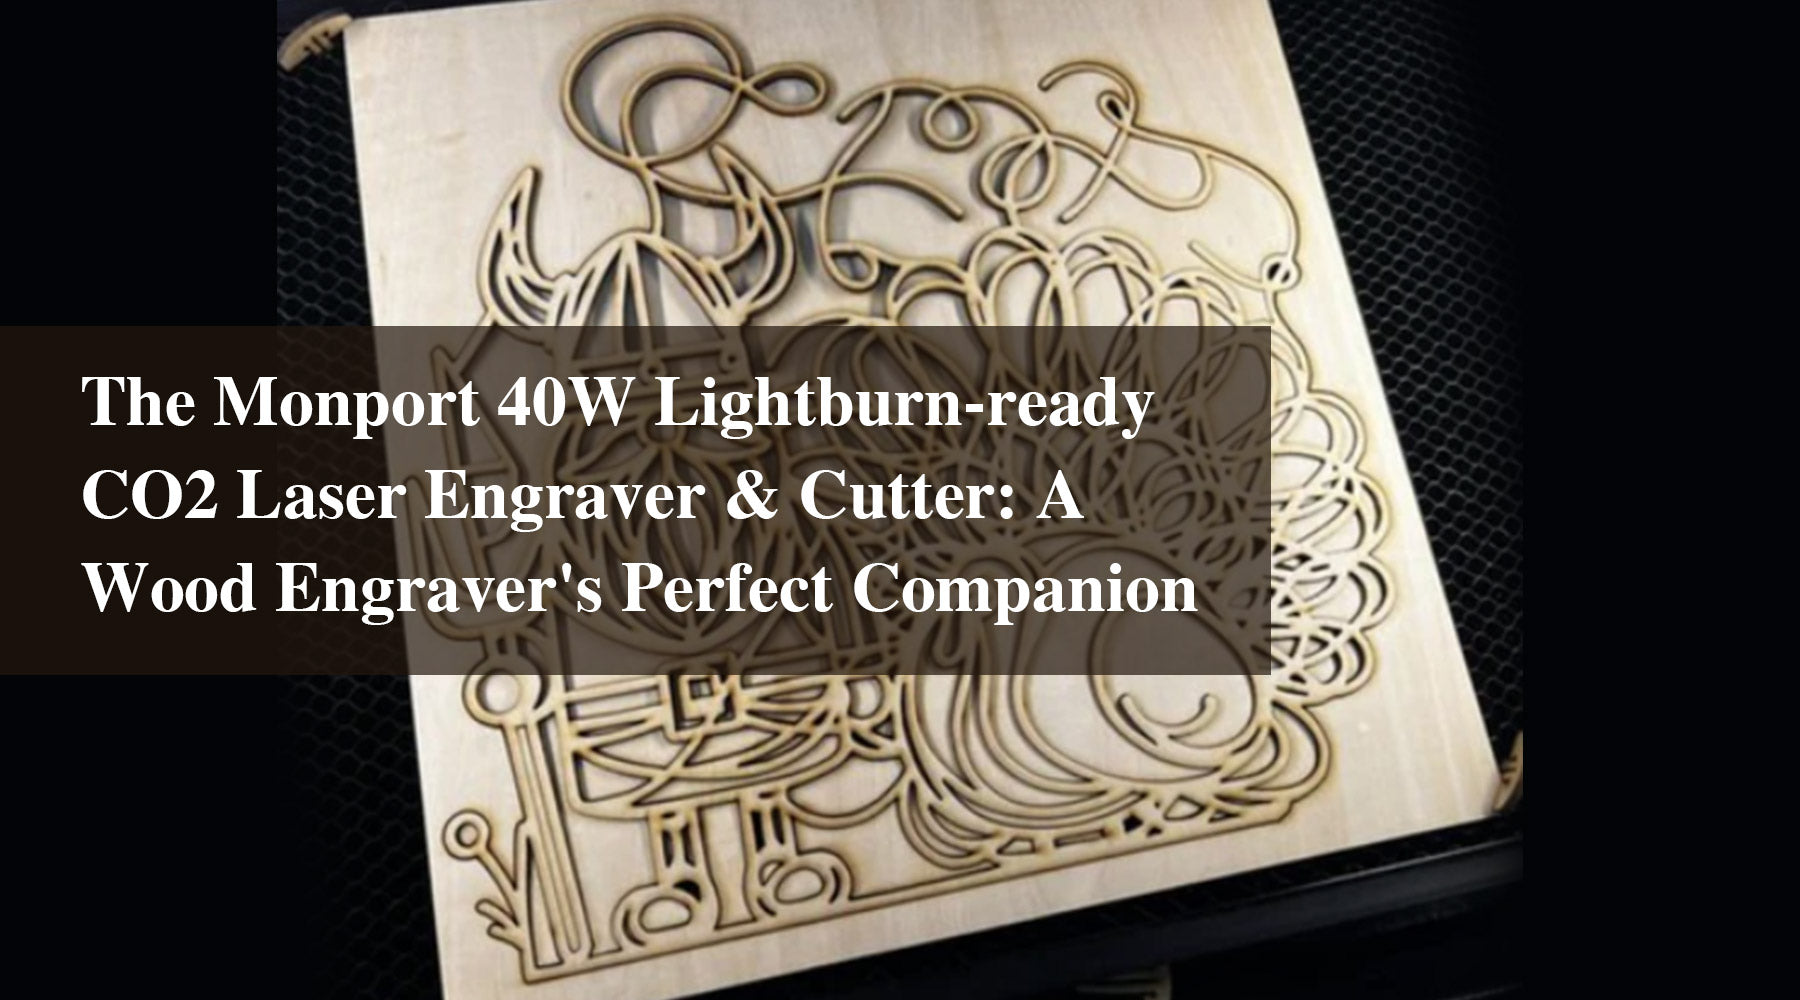 The Monport 40W Lightburn-ready CO2 Laser Engraver & Cutter: A Wood Engraver's Perfect Companion